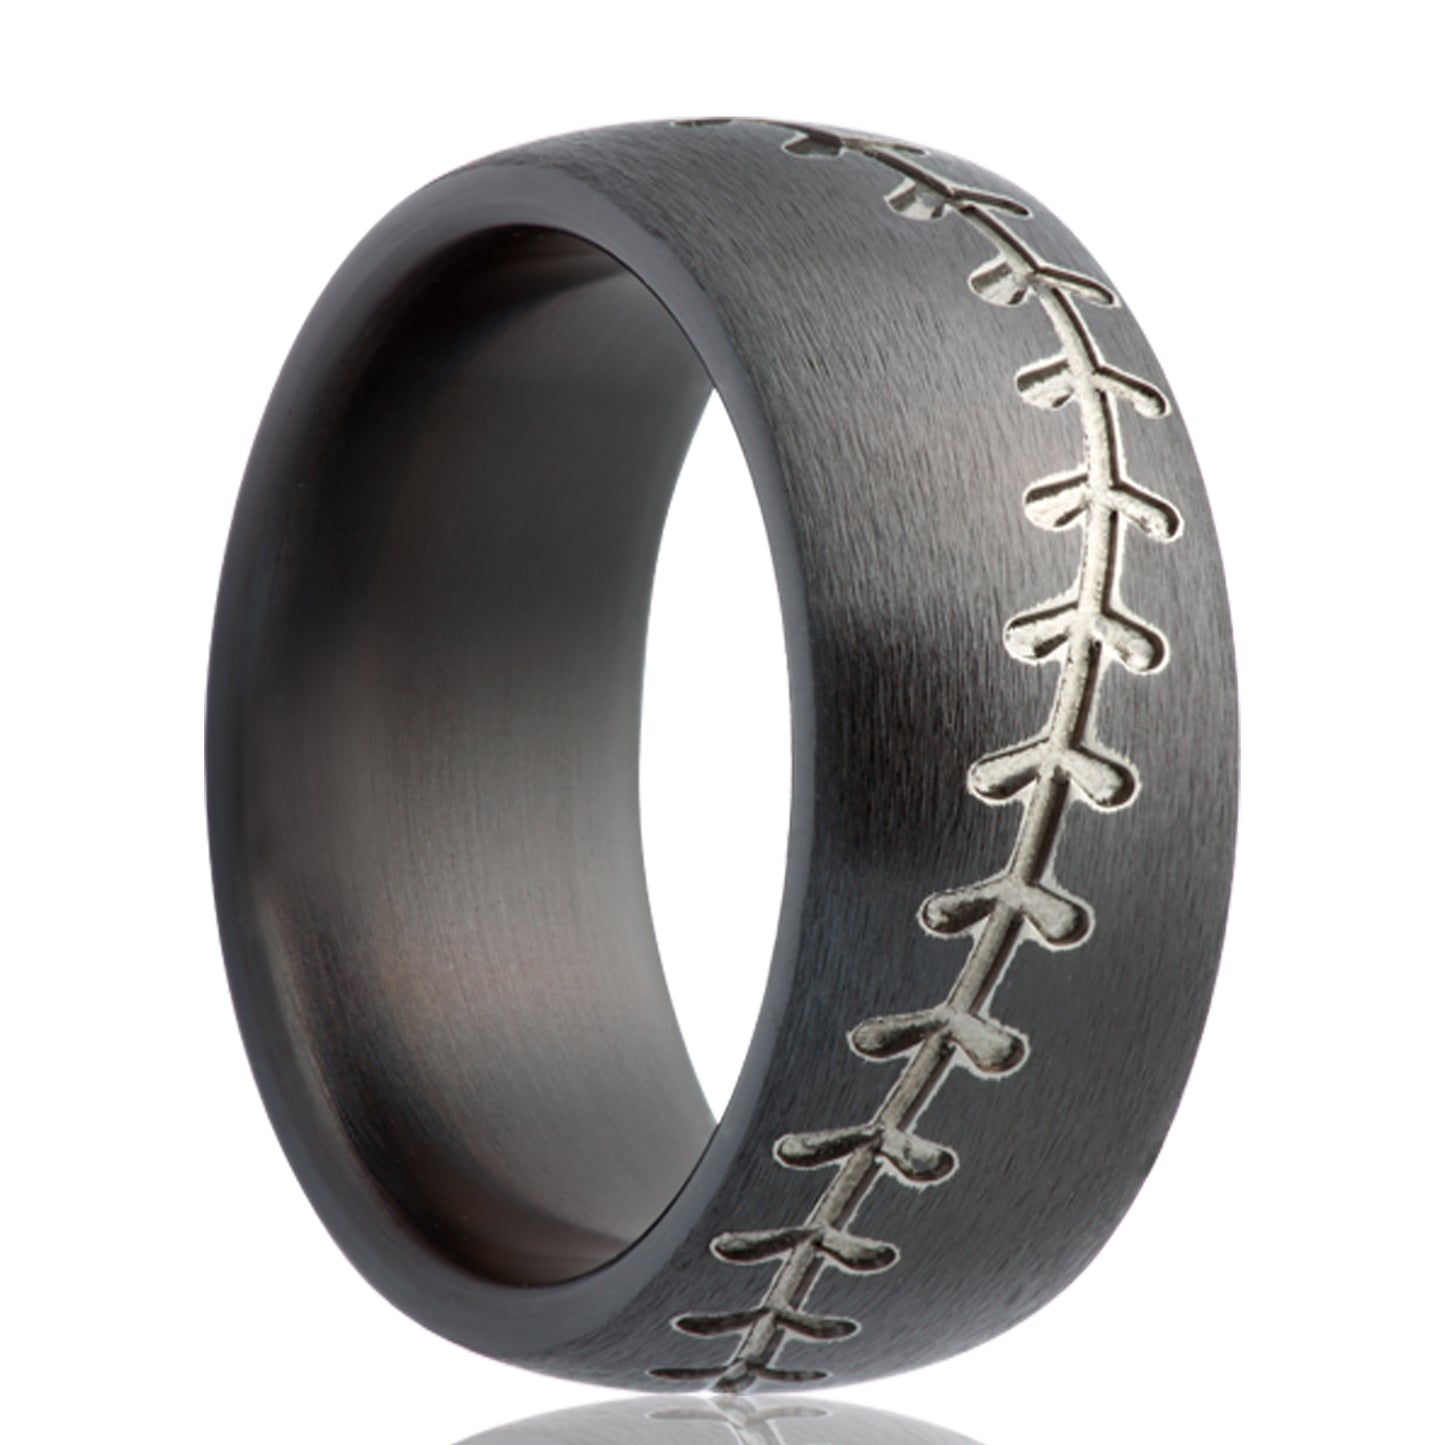 A basketball pattern domed zirconium men's wedding band displayed on a neutral white background.